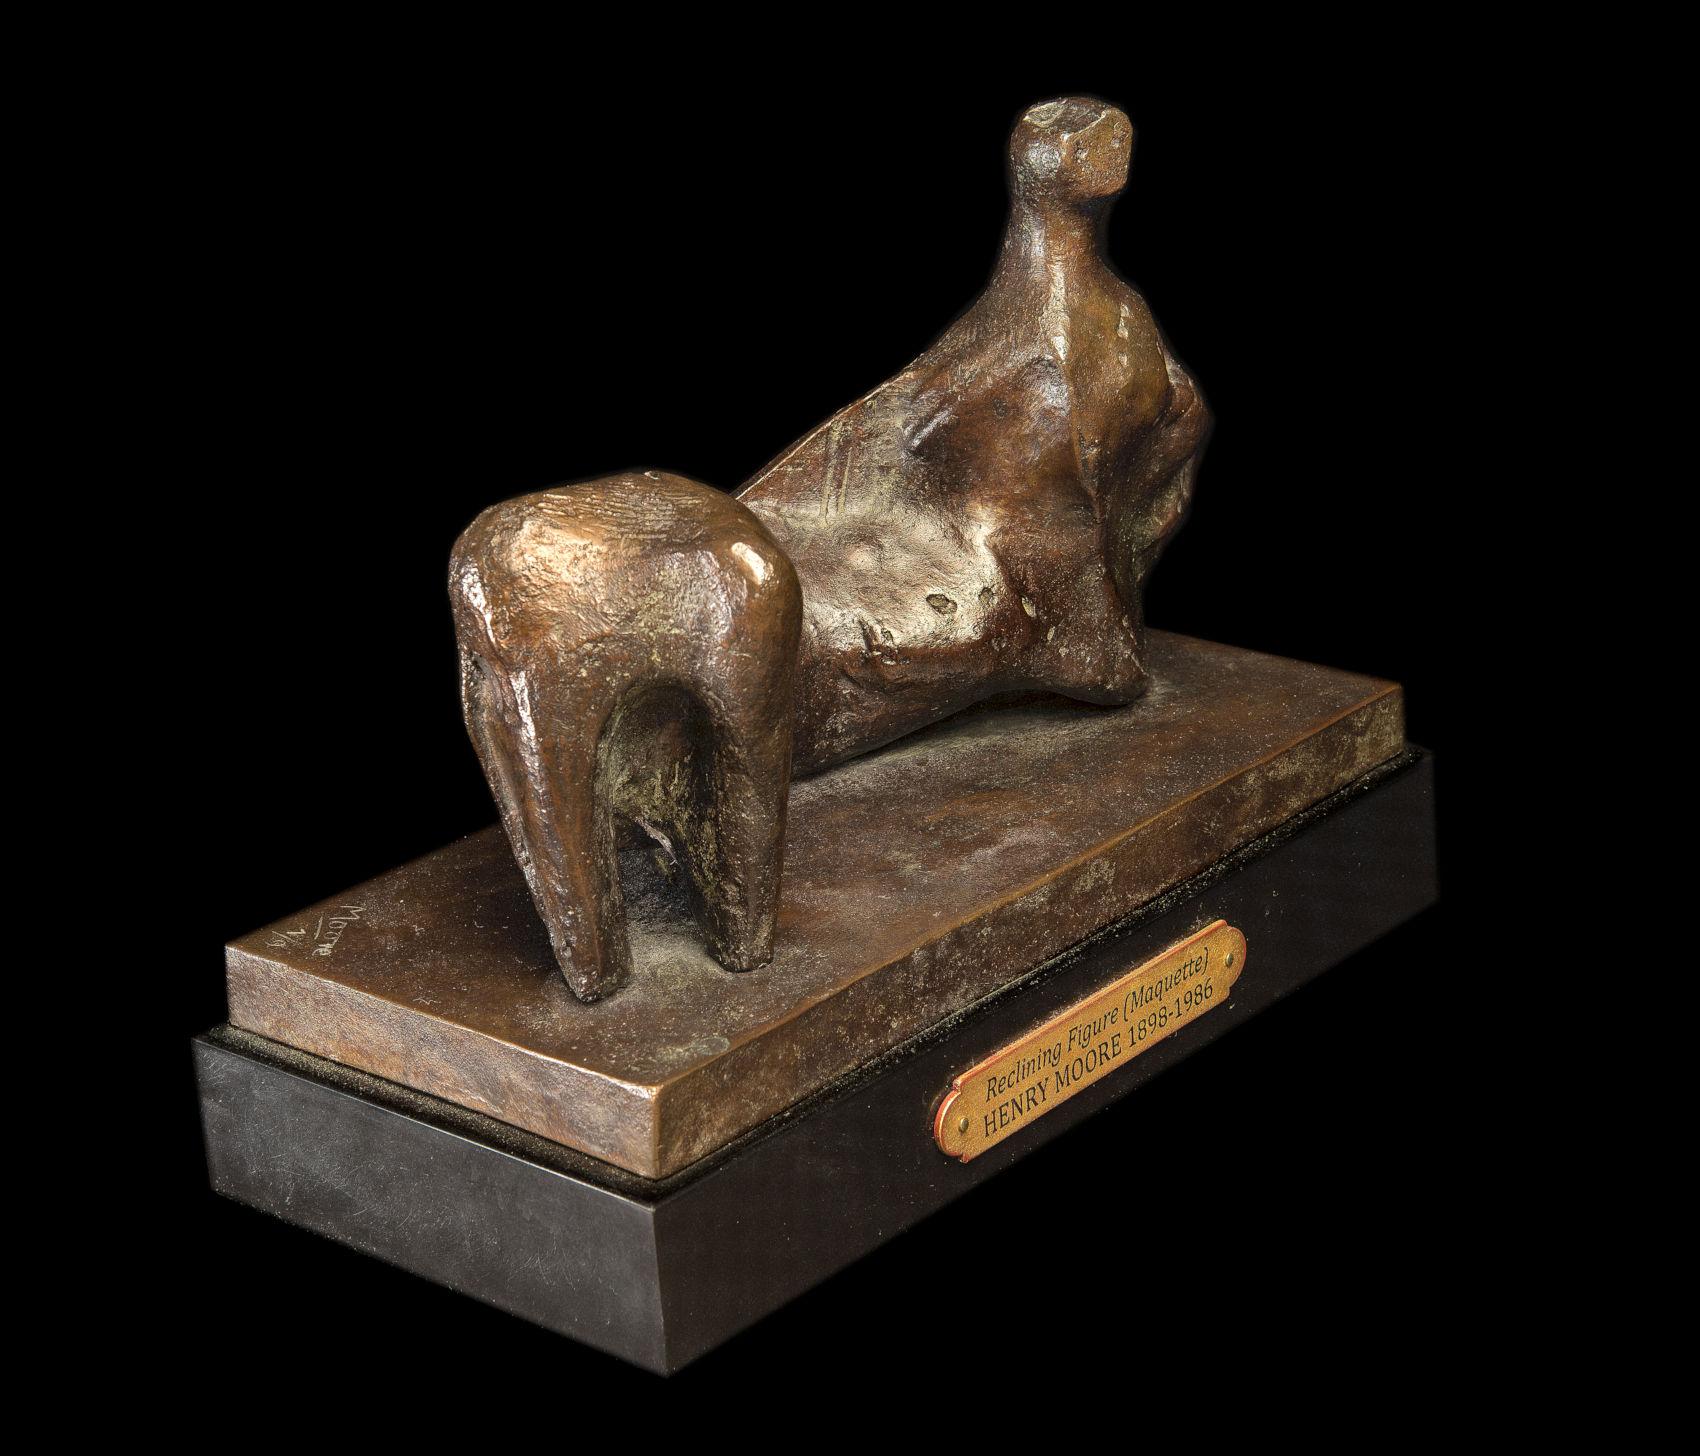 Reclining Figure (Maquette) - Sculpture by Henry Moore